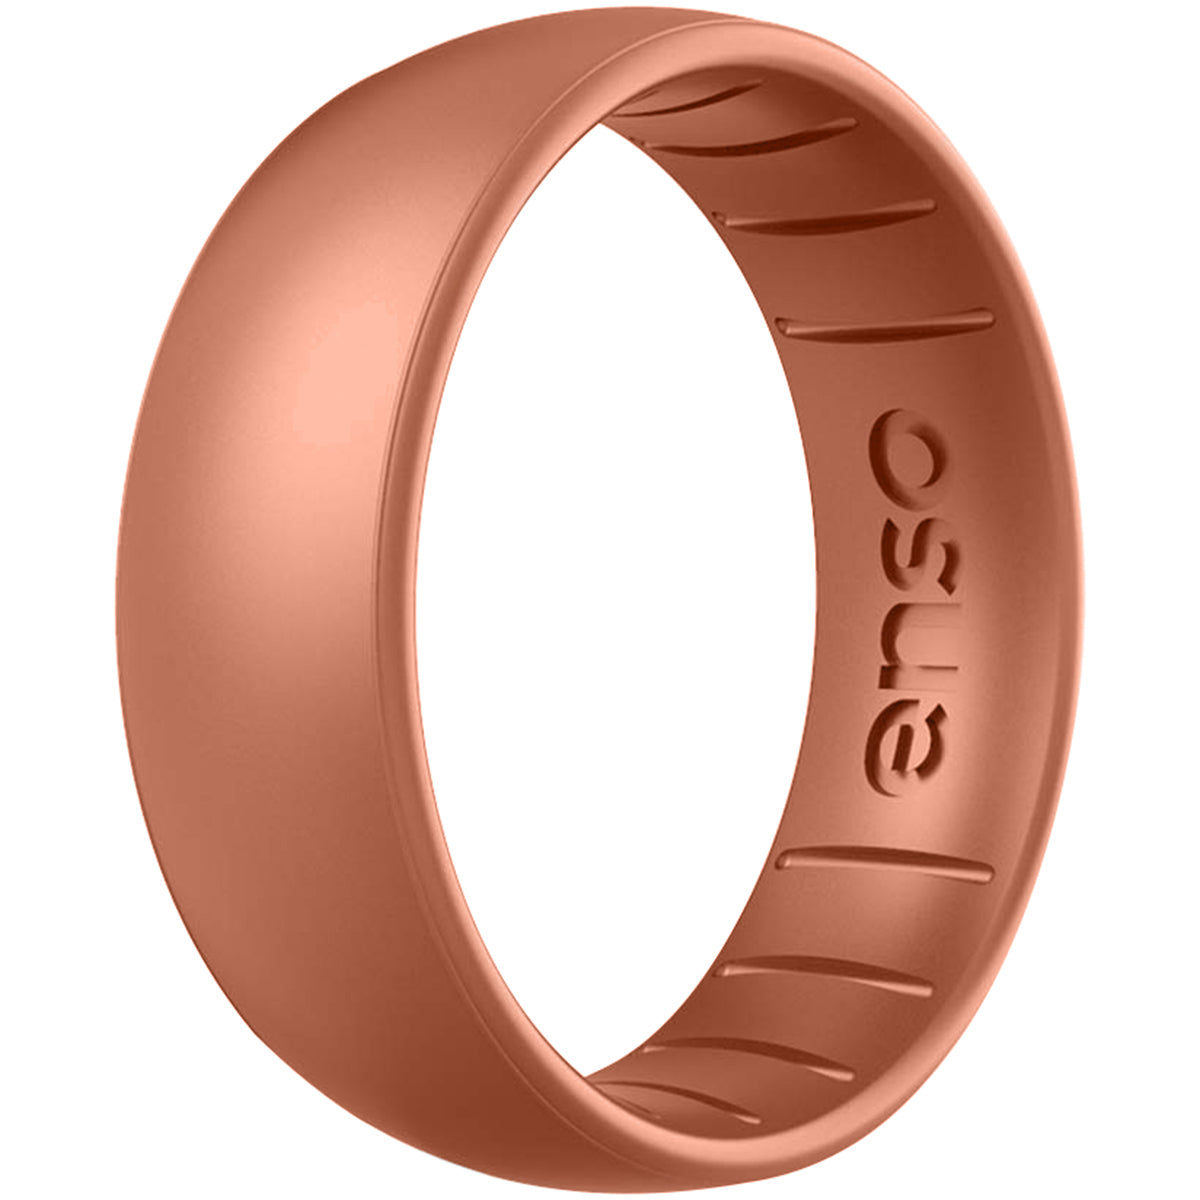 Enso Rings Classic Elements Series Silicone Ring - Copper Enso Rings